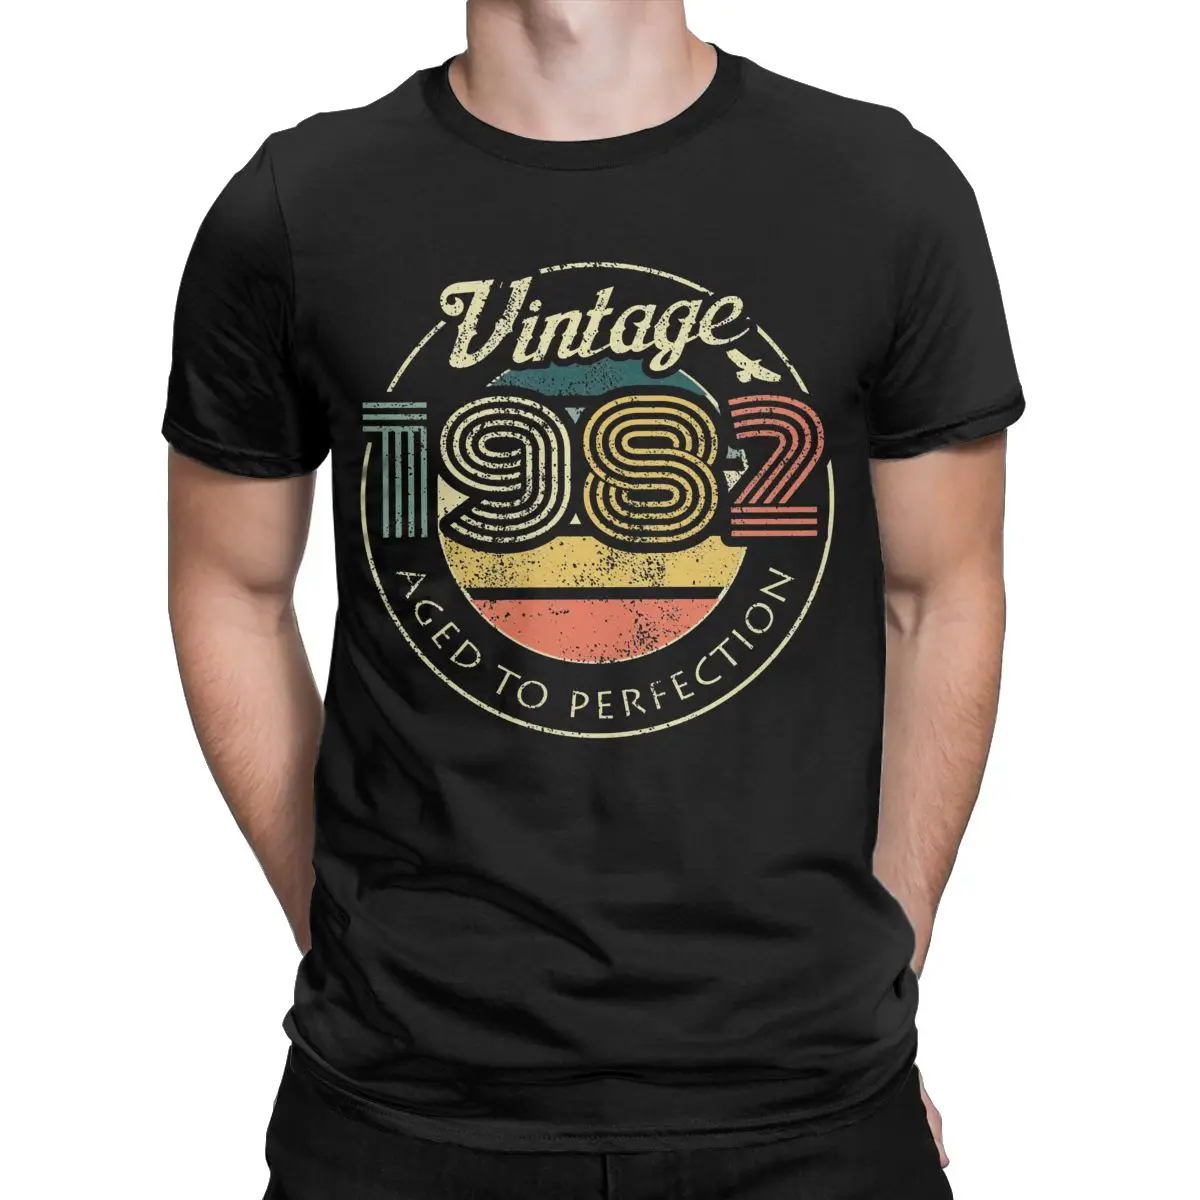 Men Women T-Shirts 1982 Aged To Perfection Birthday Humor Pure Cotton Tees Short Sleeve T Shirts Crewneck Tops Summer